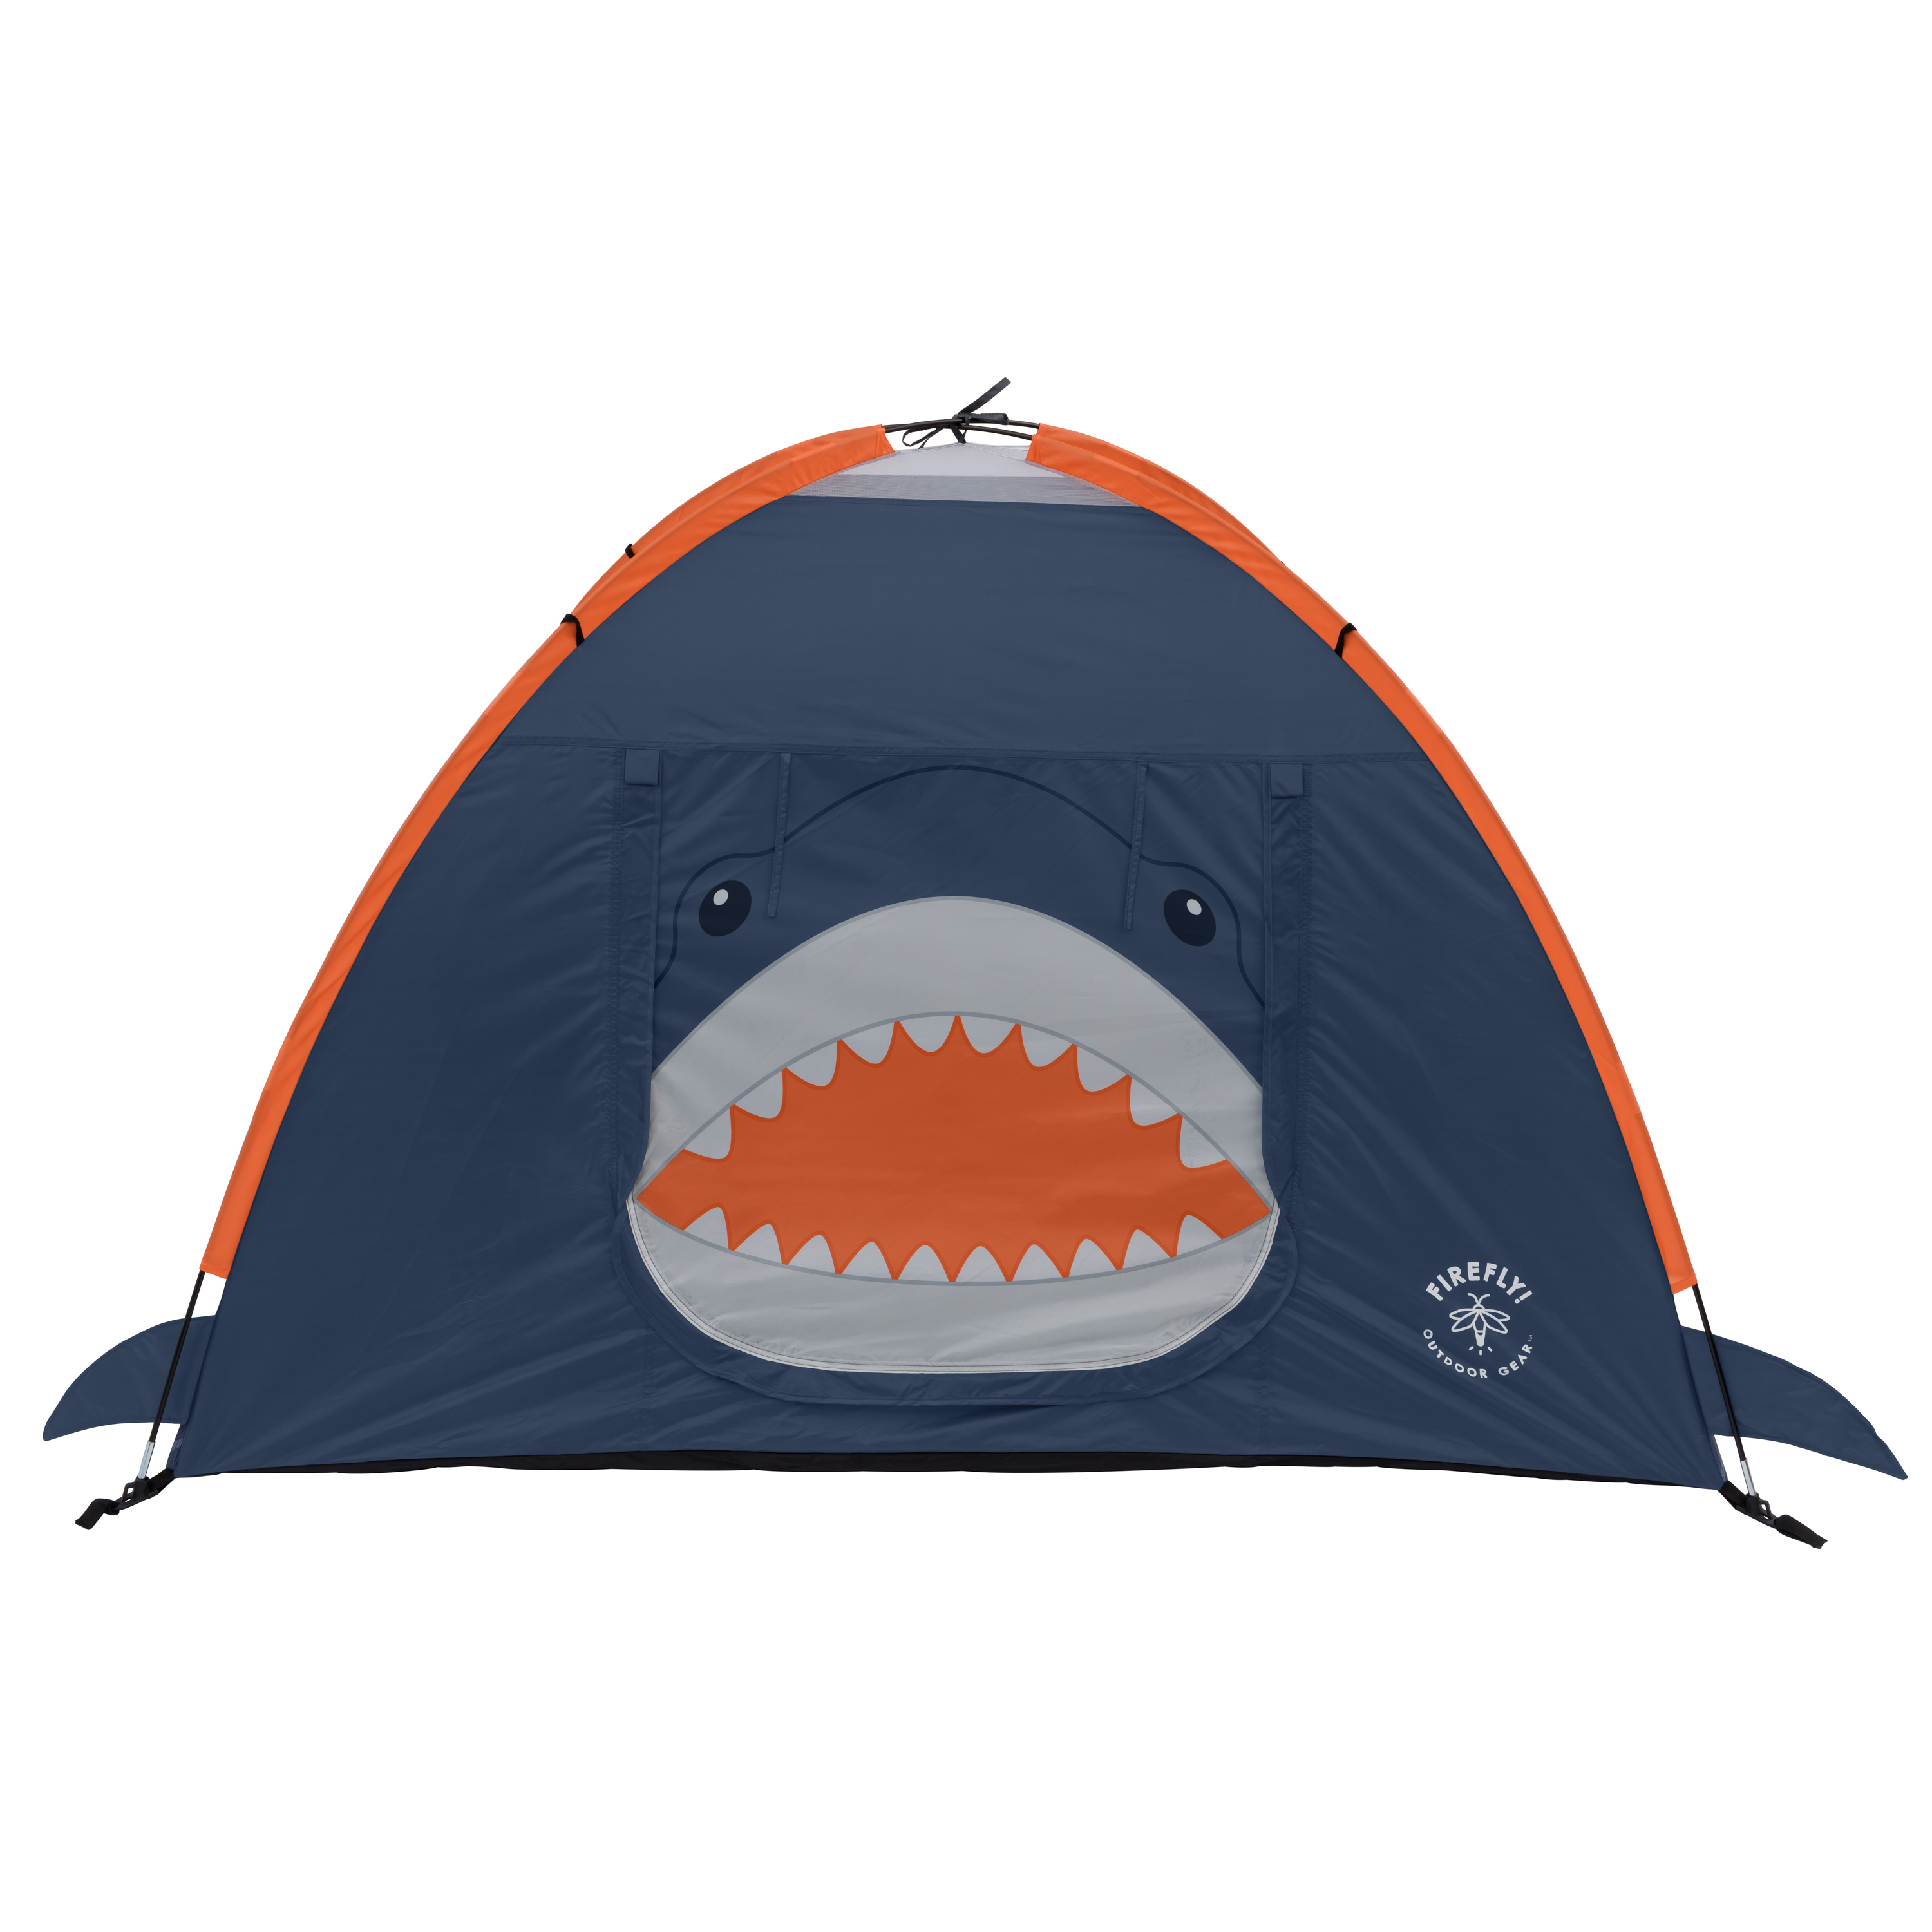 Firefly! Outdoor Gear Finn the Shark Kid's Camping Combo (One-Room Tent, Sleeping Bag, Lanter - image 2 of 30